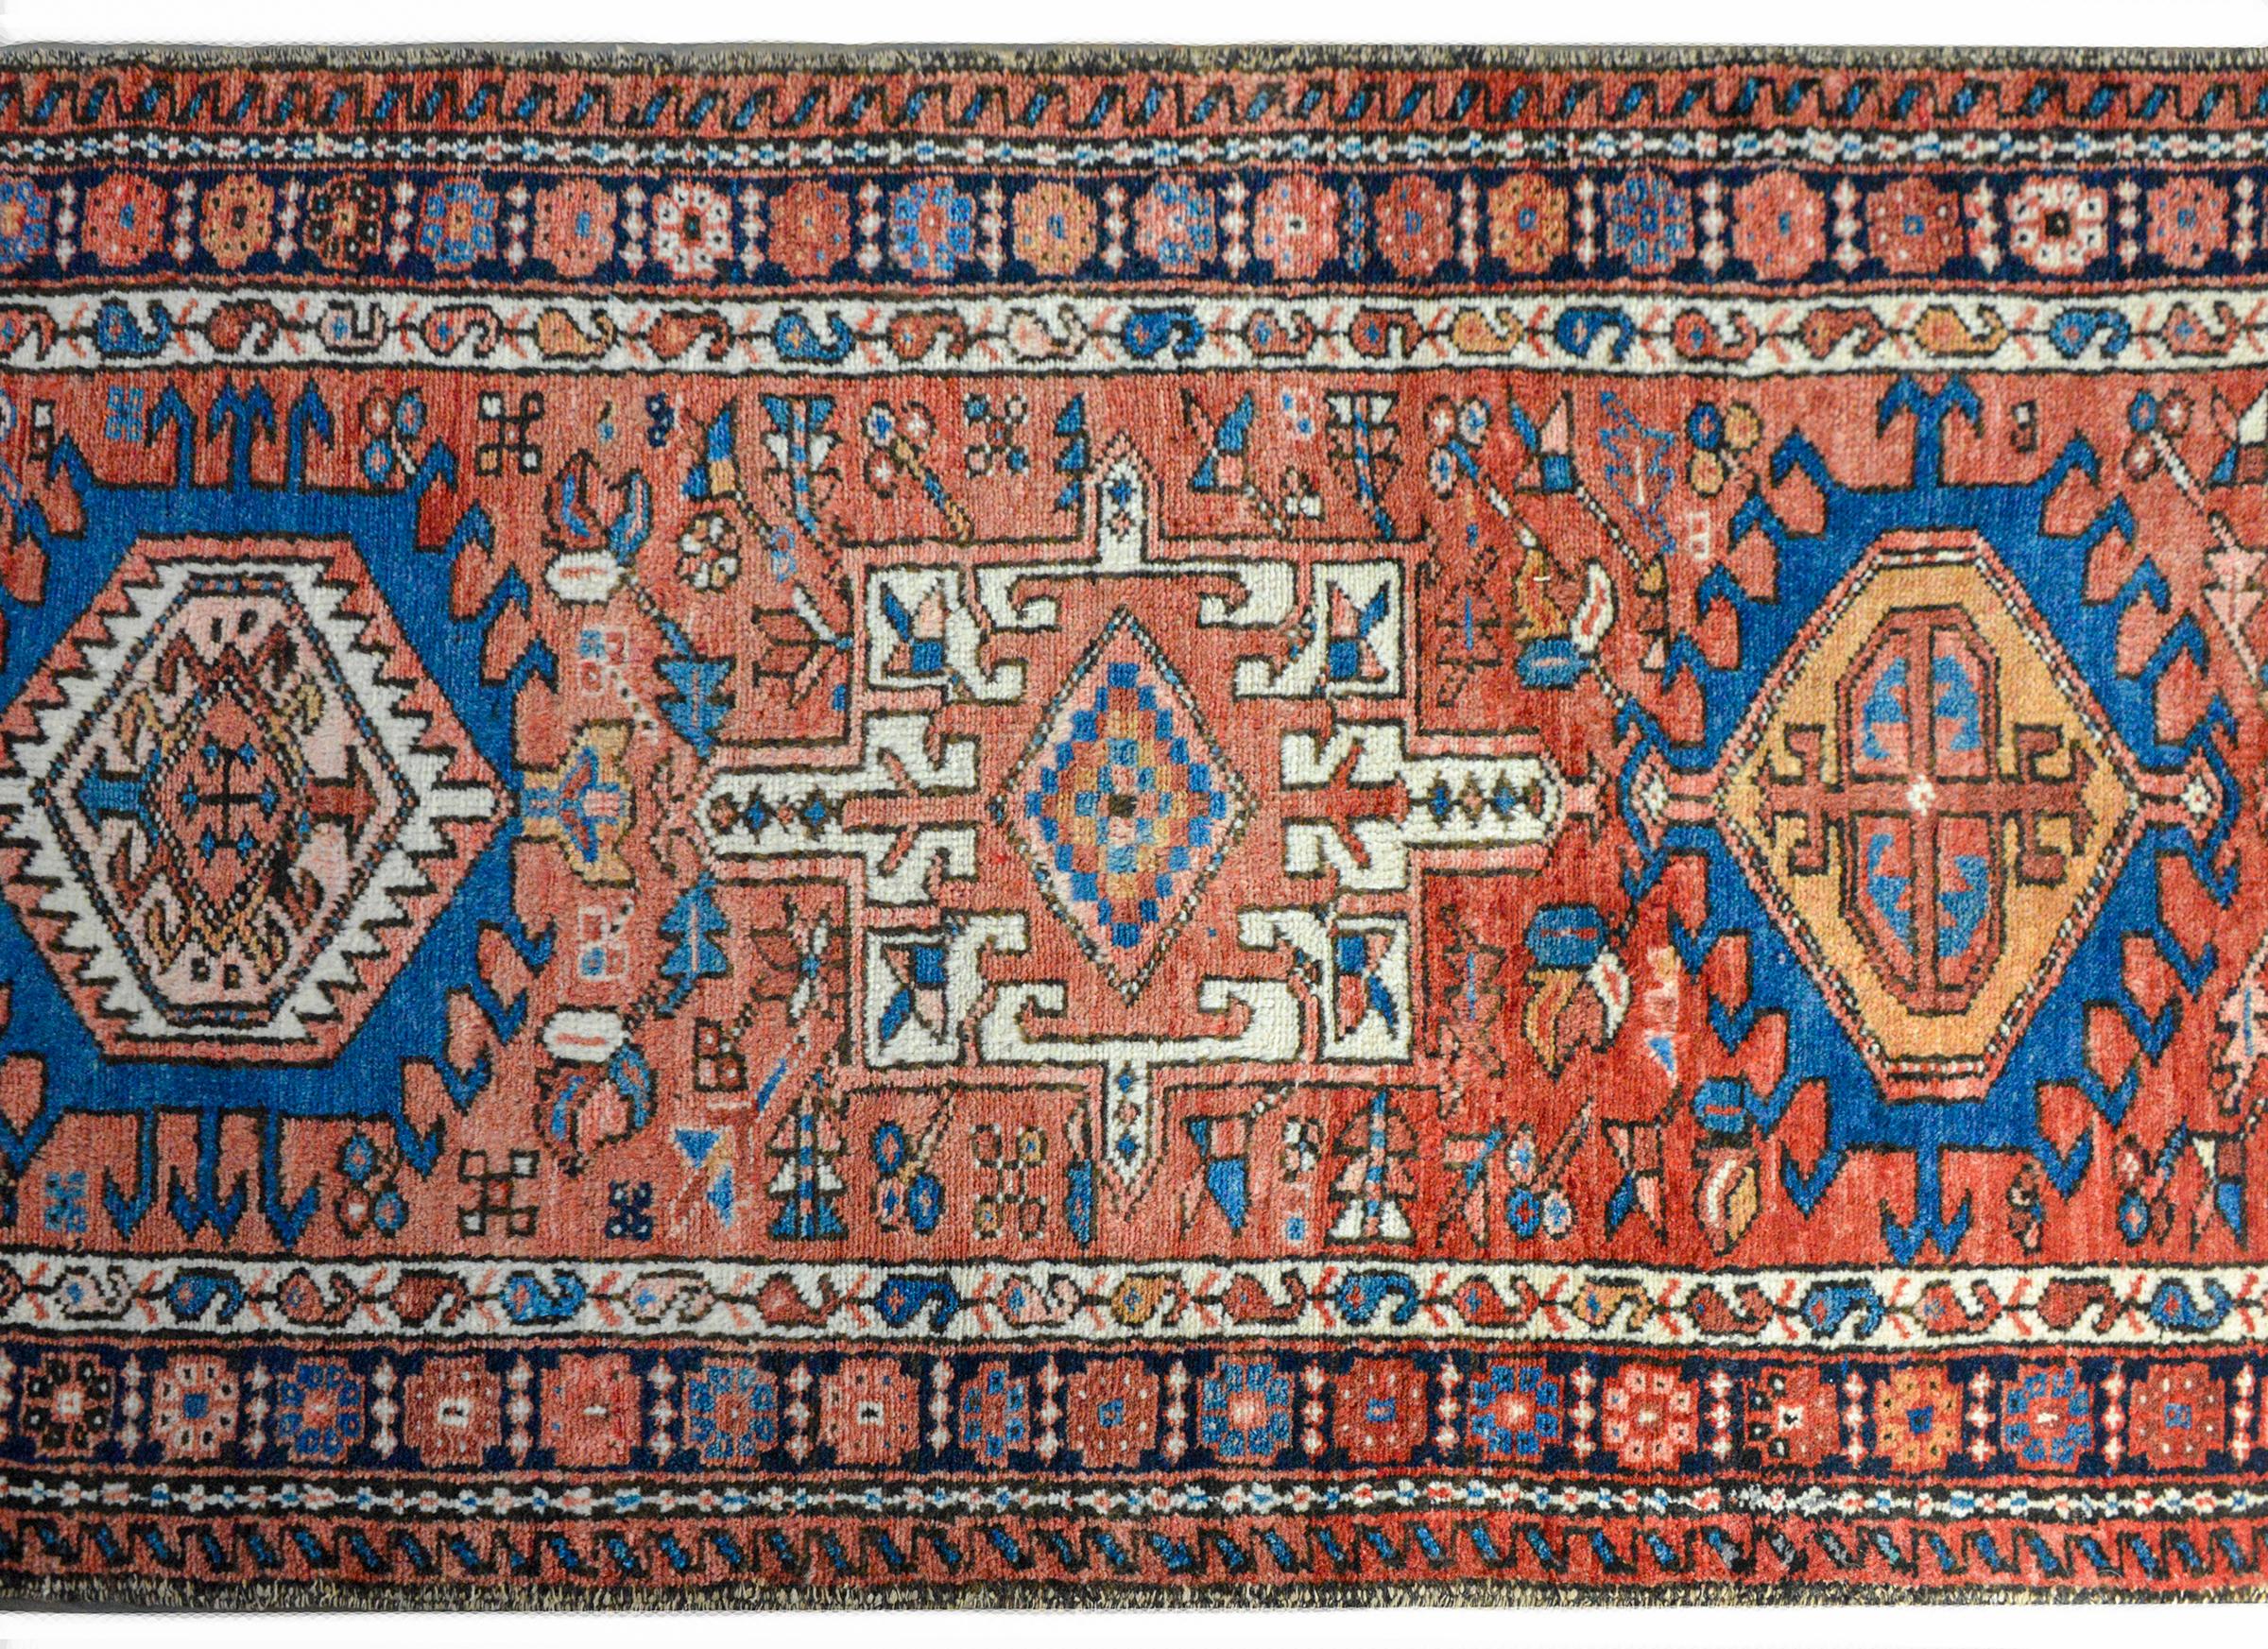 A wonderful mid-20th century Persian Karadja runner with several stylized floral medallions woven in myriad colors including indigo, pink, white, crimson, and gold, amidst a field of more stylized flowers against a crimson background. The border is